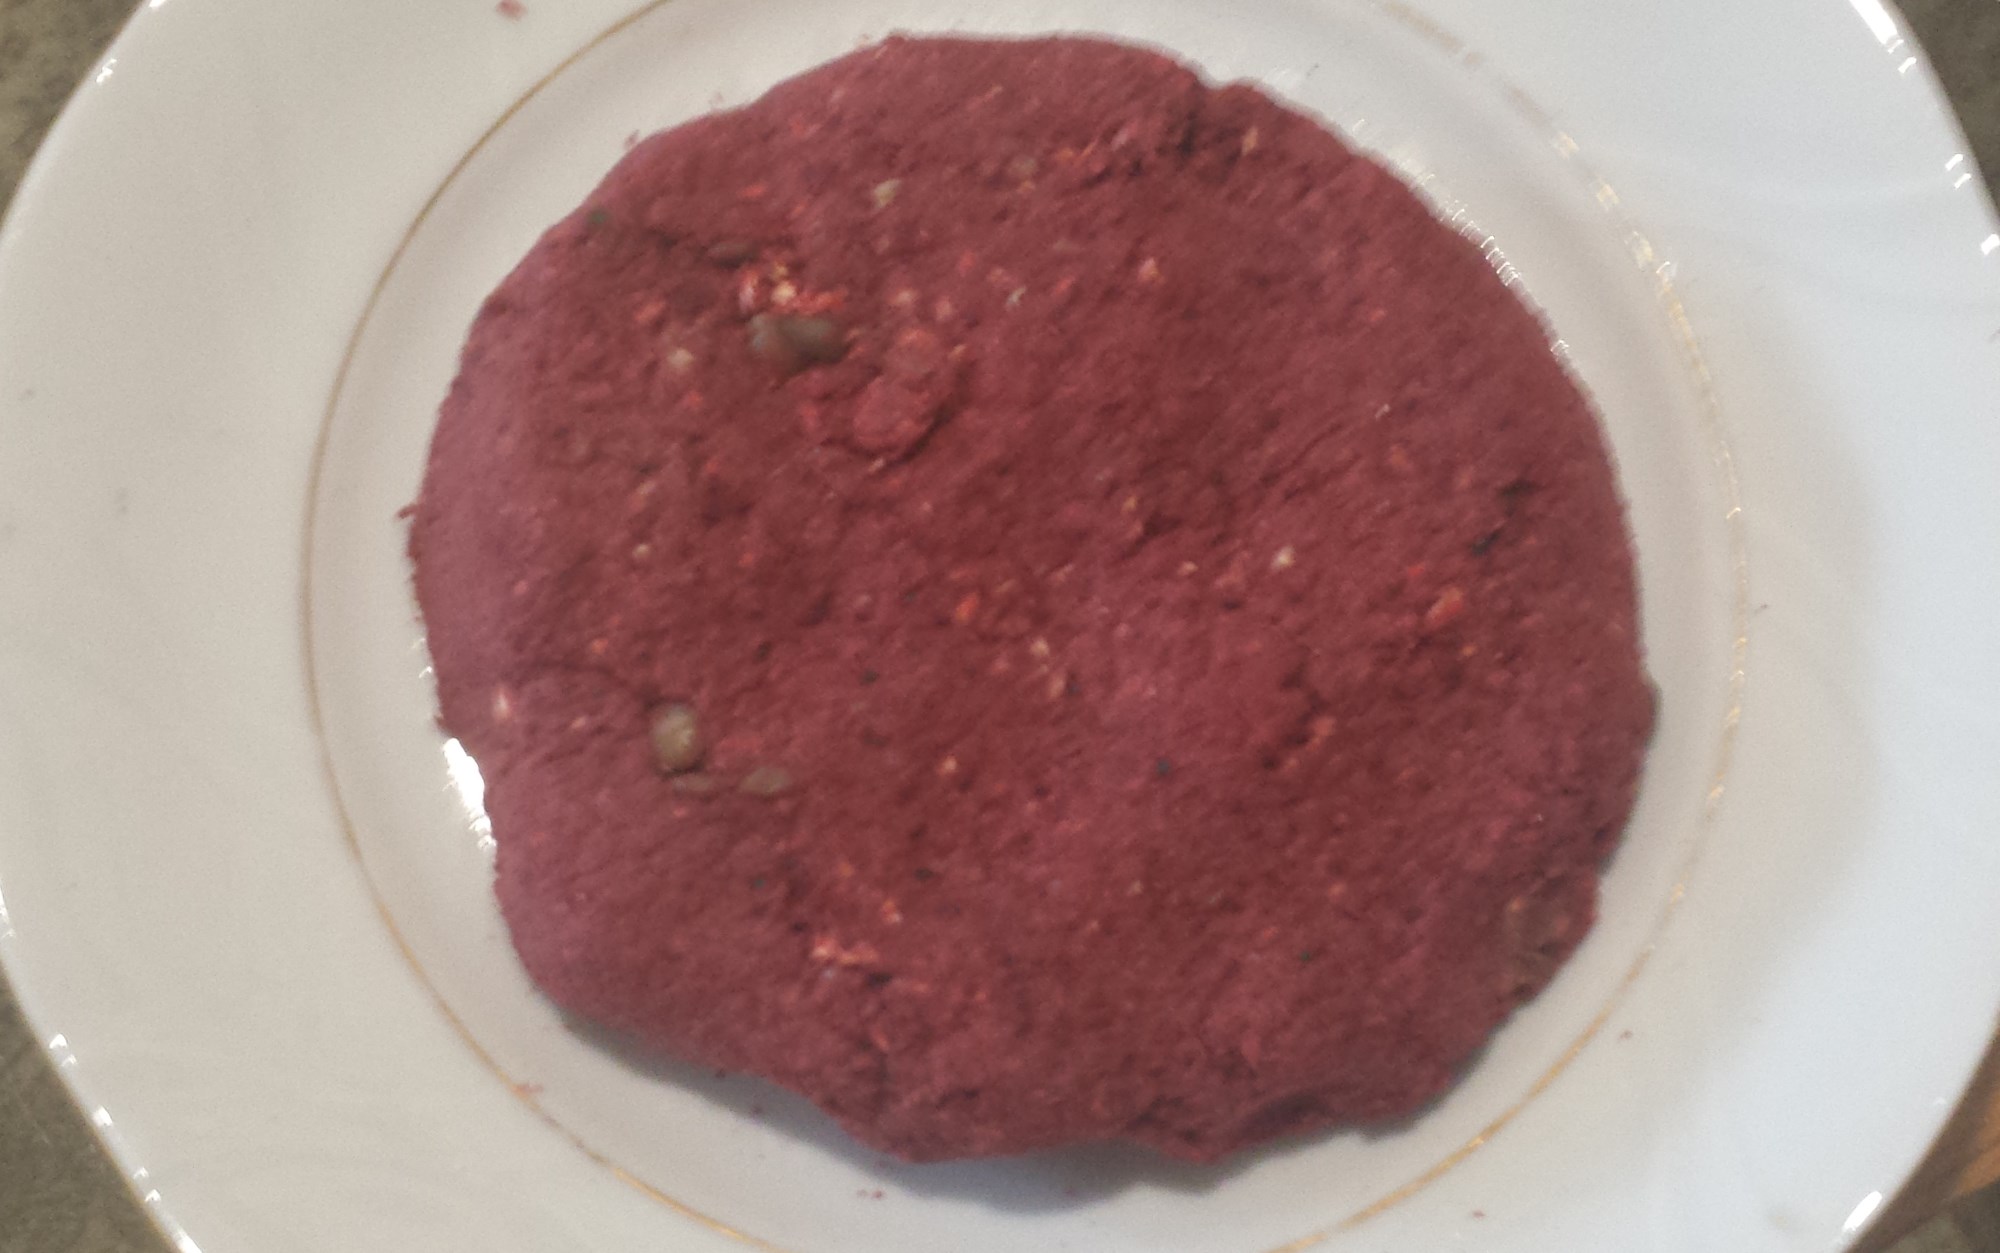 Beet and lentil plant based burger with summer savory - Photo by popular fitness